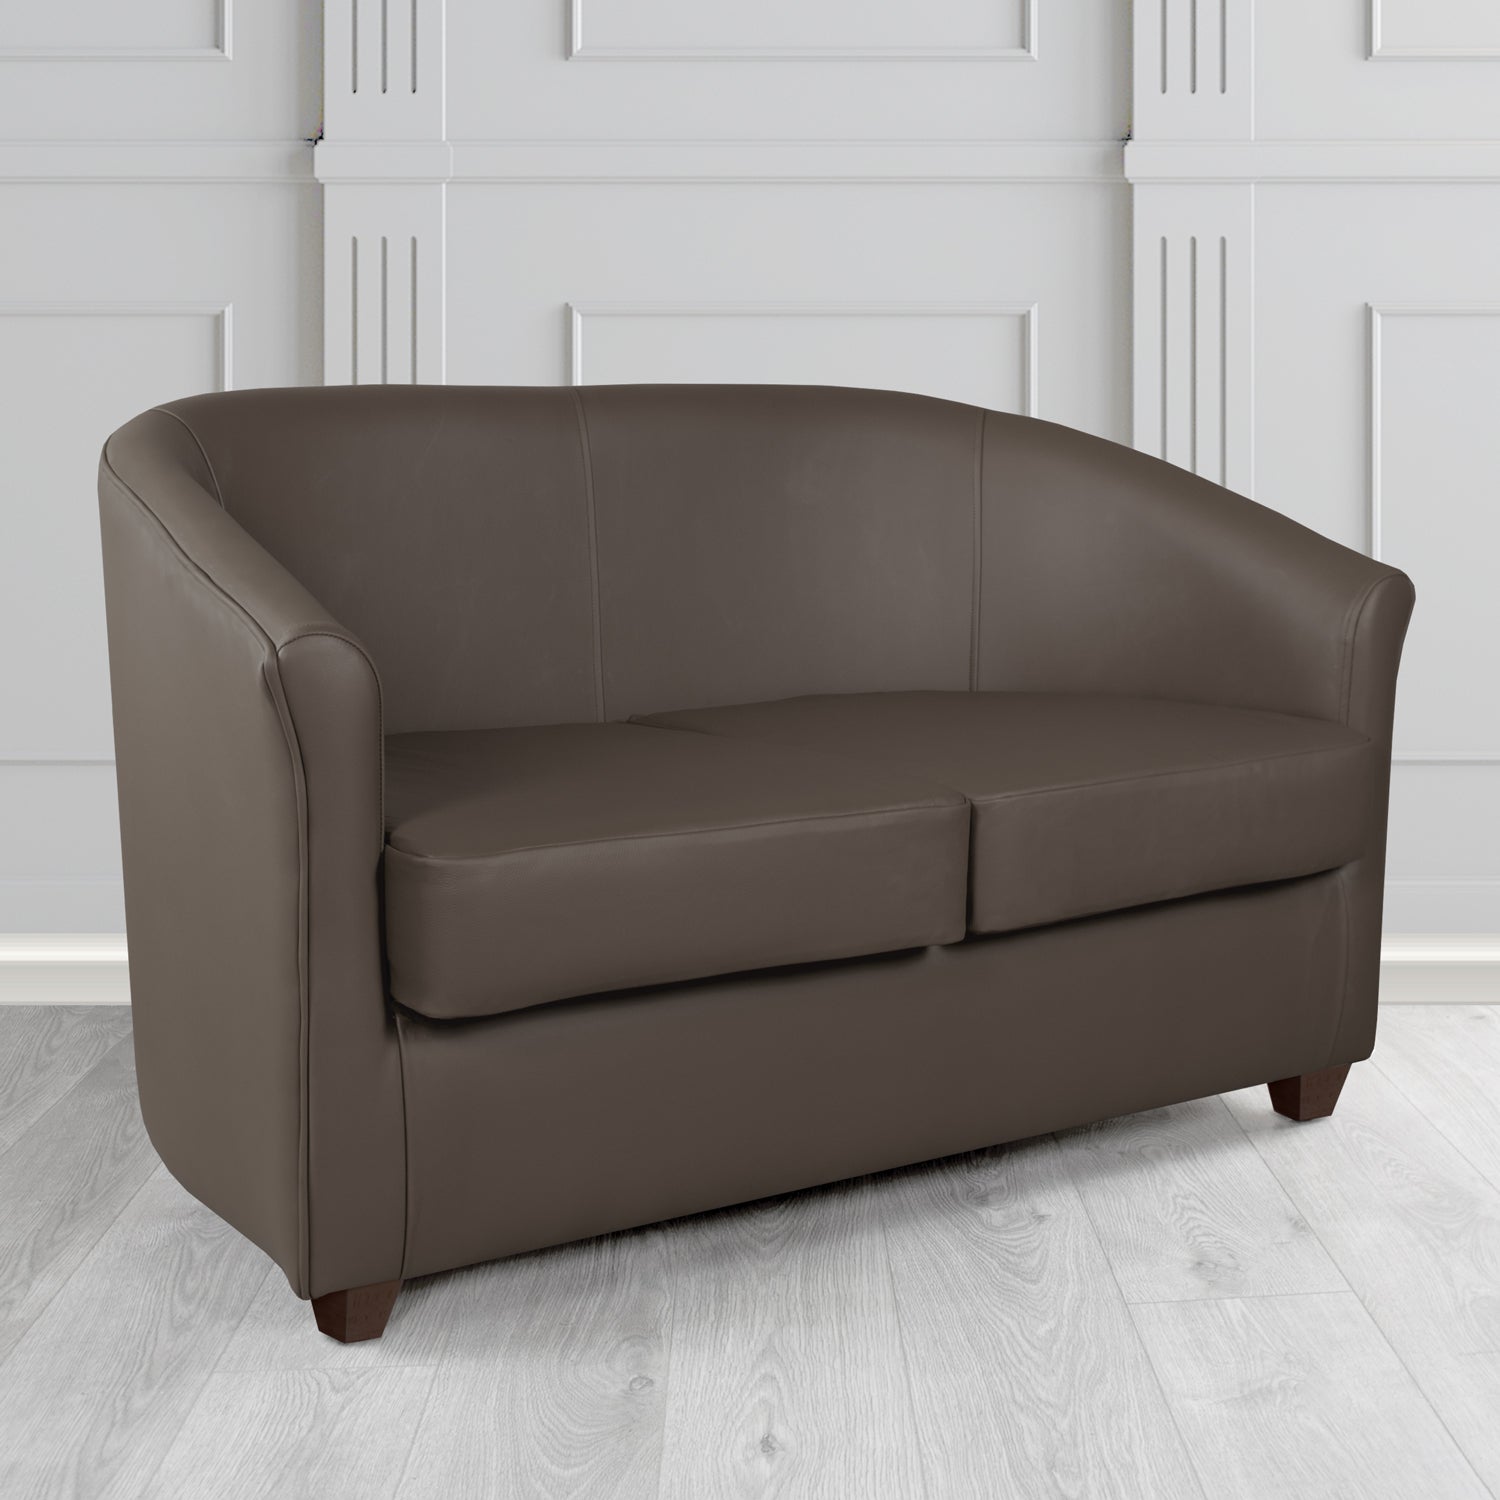 Cannes 2 Seater Tub Sofa in Madrid Chocolate Faux Leather - The Tub Chair Shop